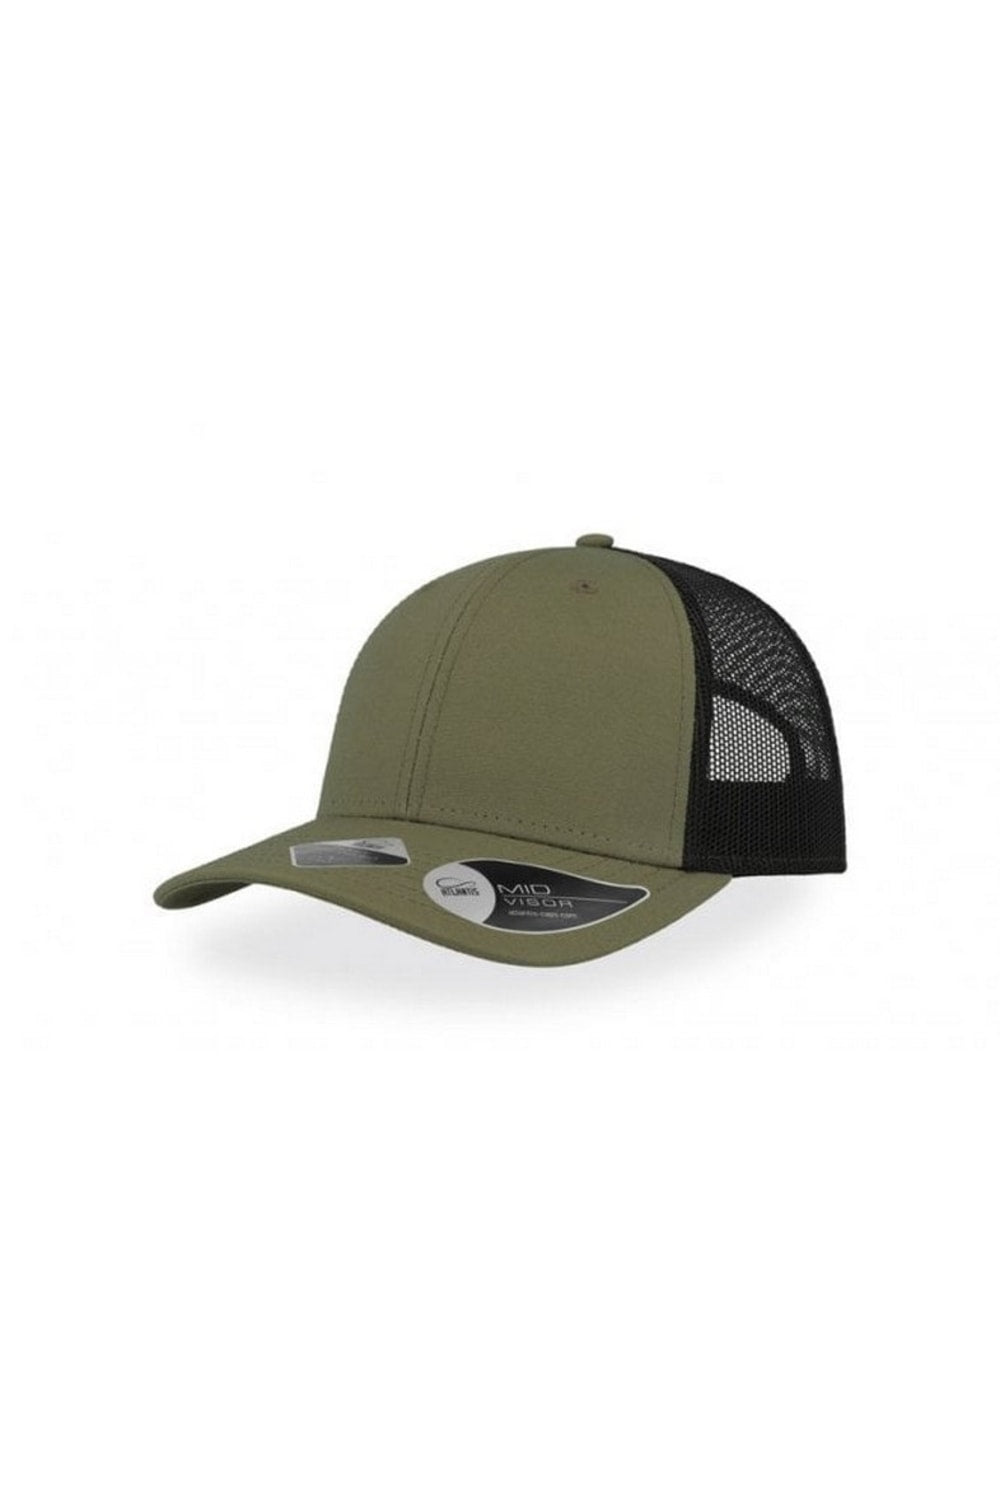 Recy Three Recycled 6 Panel Trucker Cap - Olive/Black